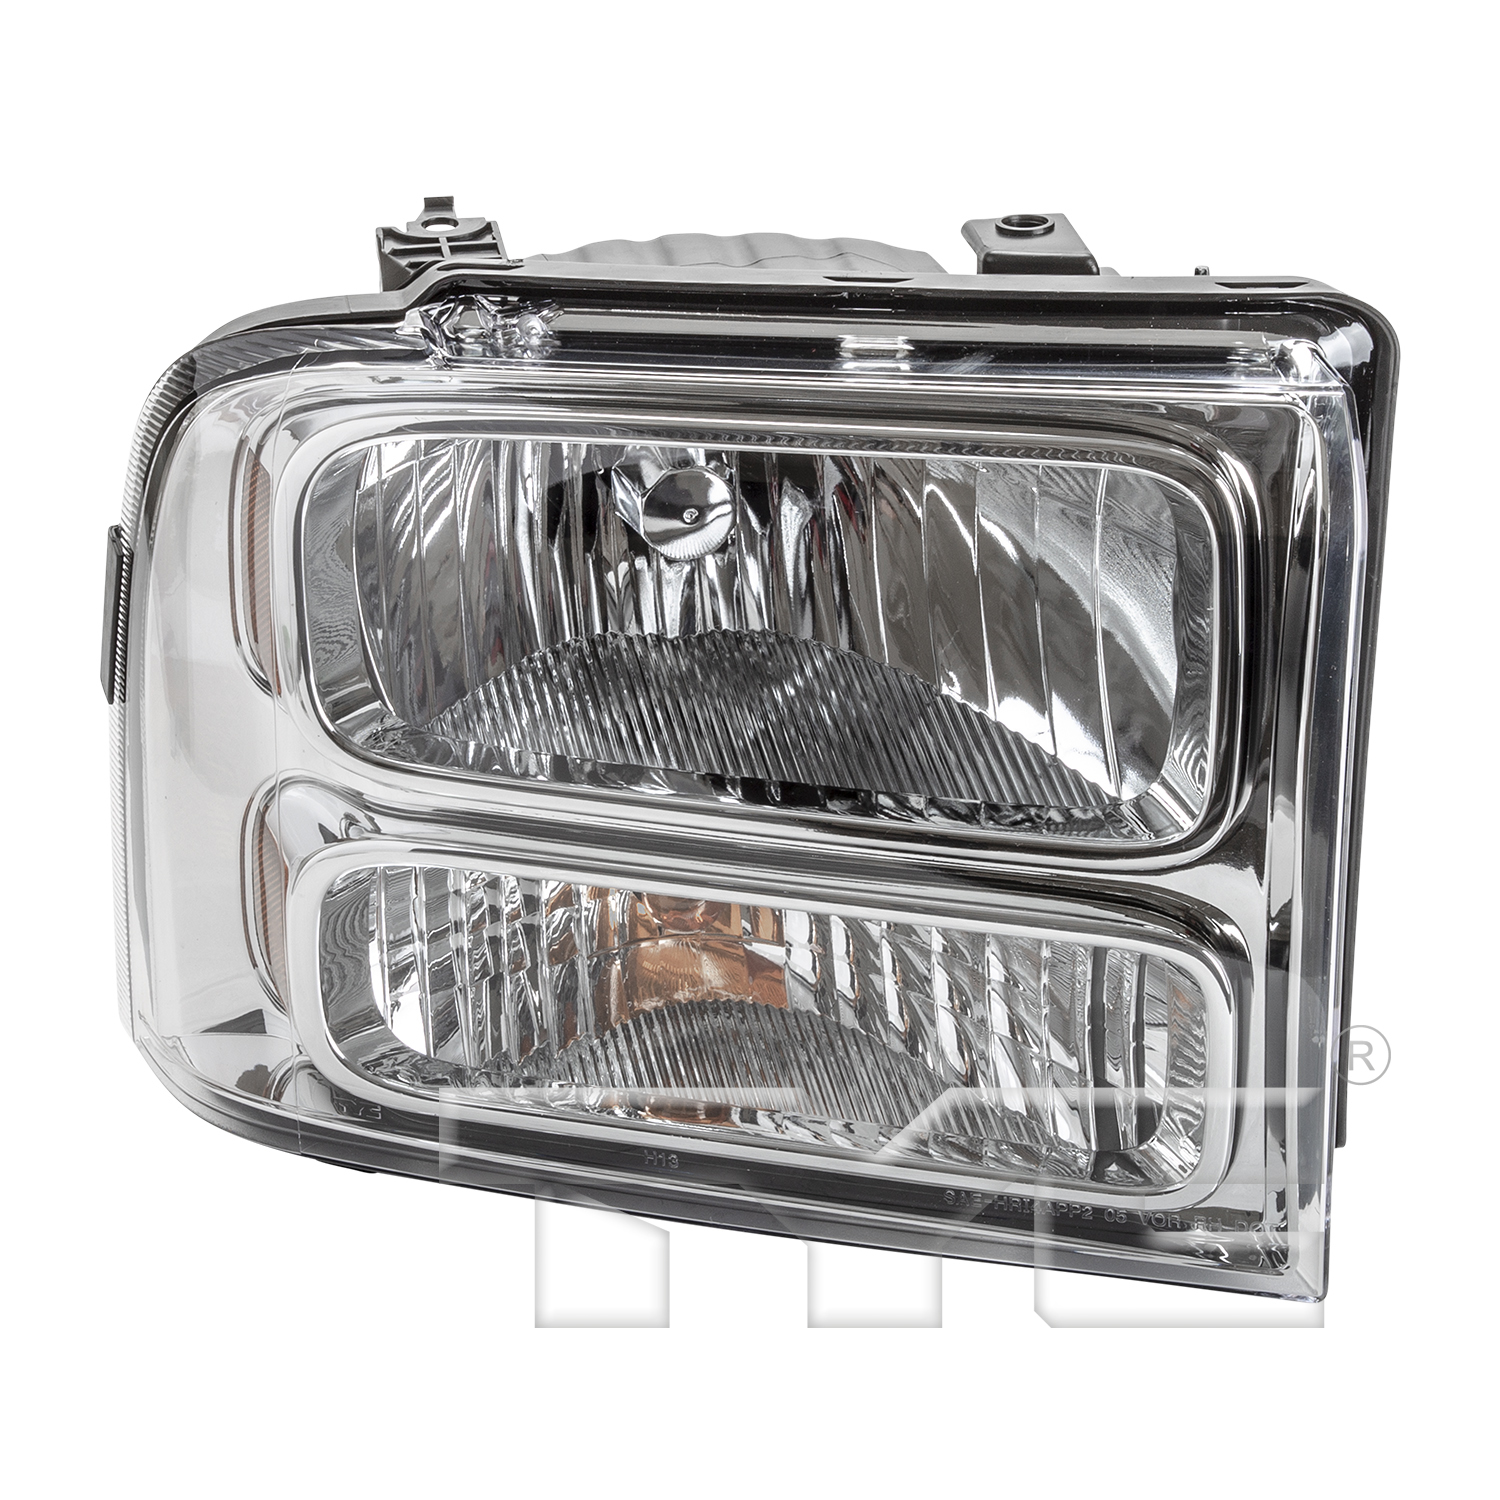 Aftermarket HEADLIGHTS for FORD - F-250 SUPER DUTY, F-250 SUPER DUTY,04-07,RT Headlamp assy composite